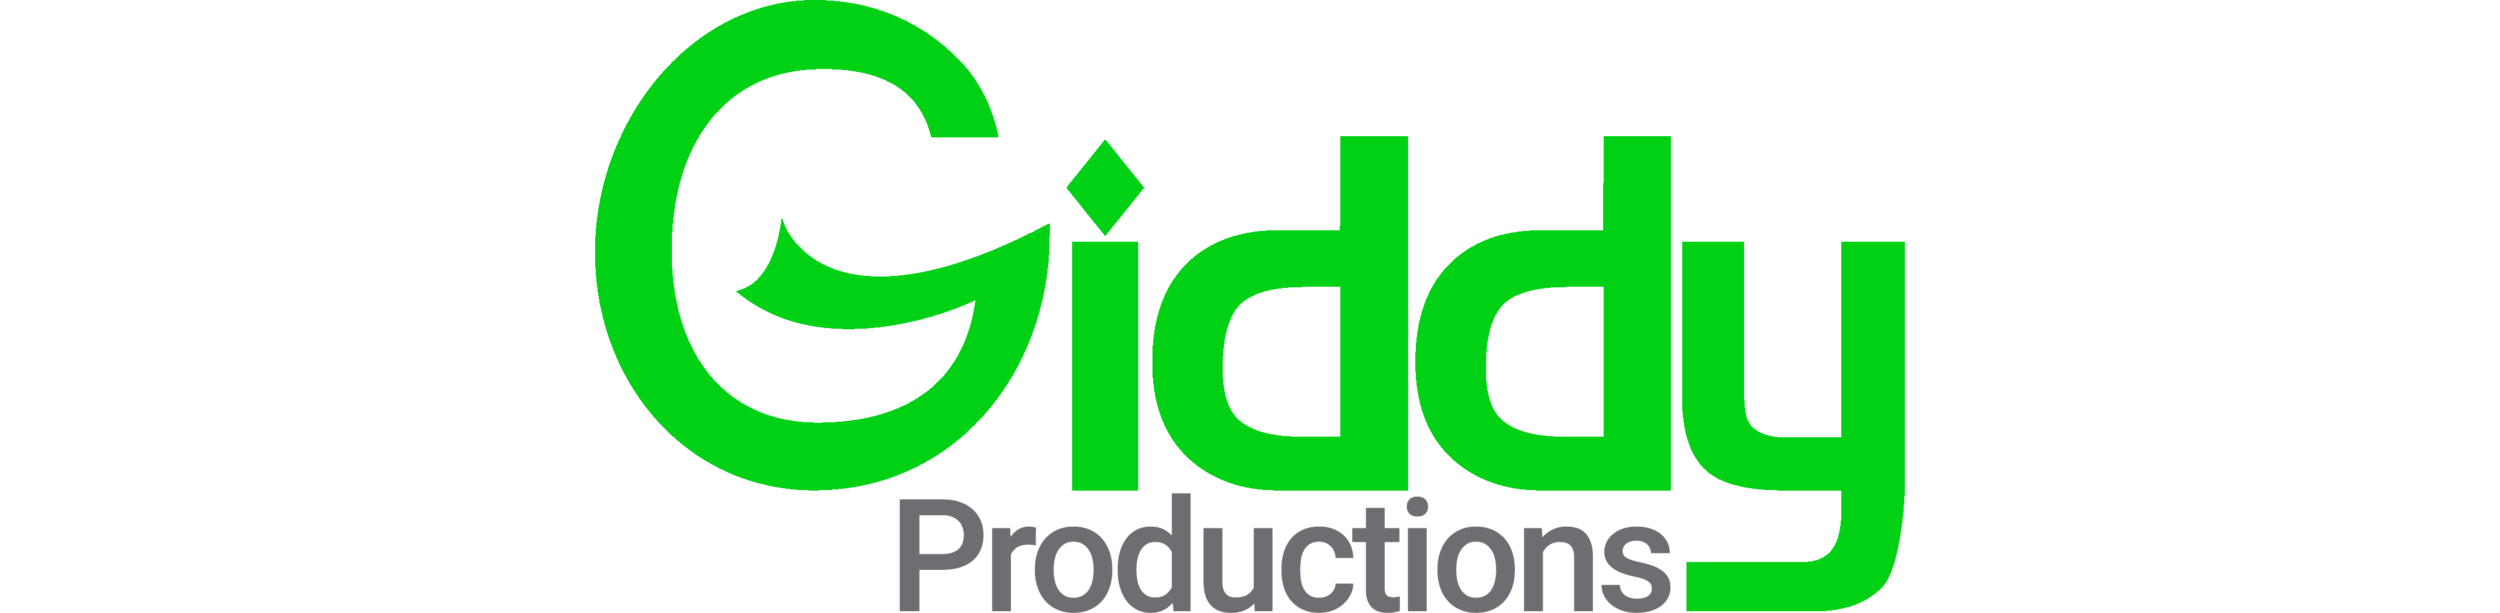 Giddy Productions